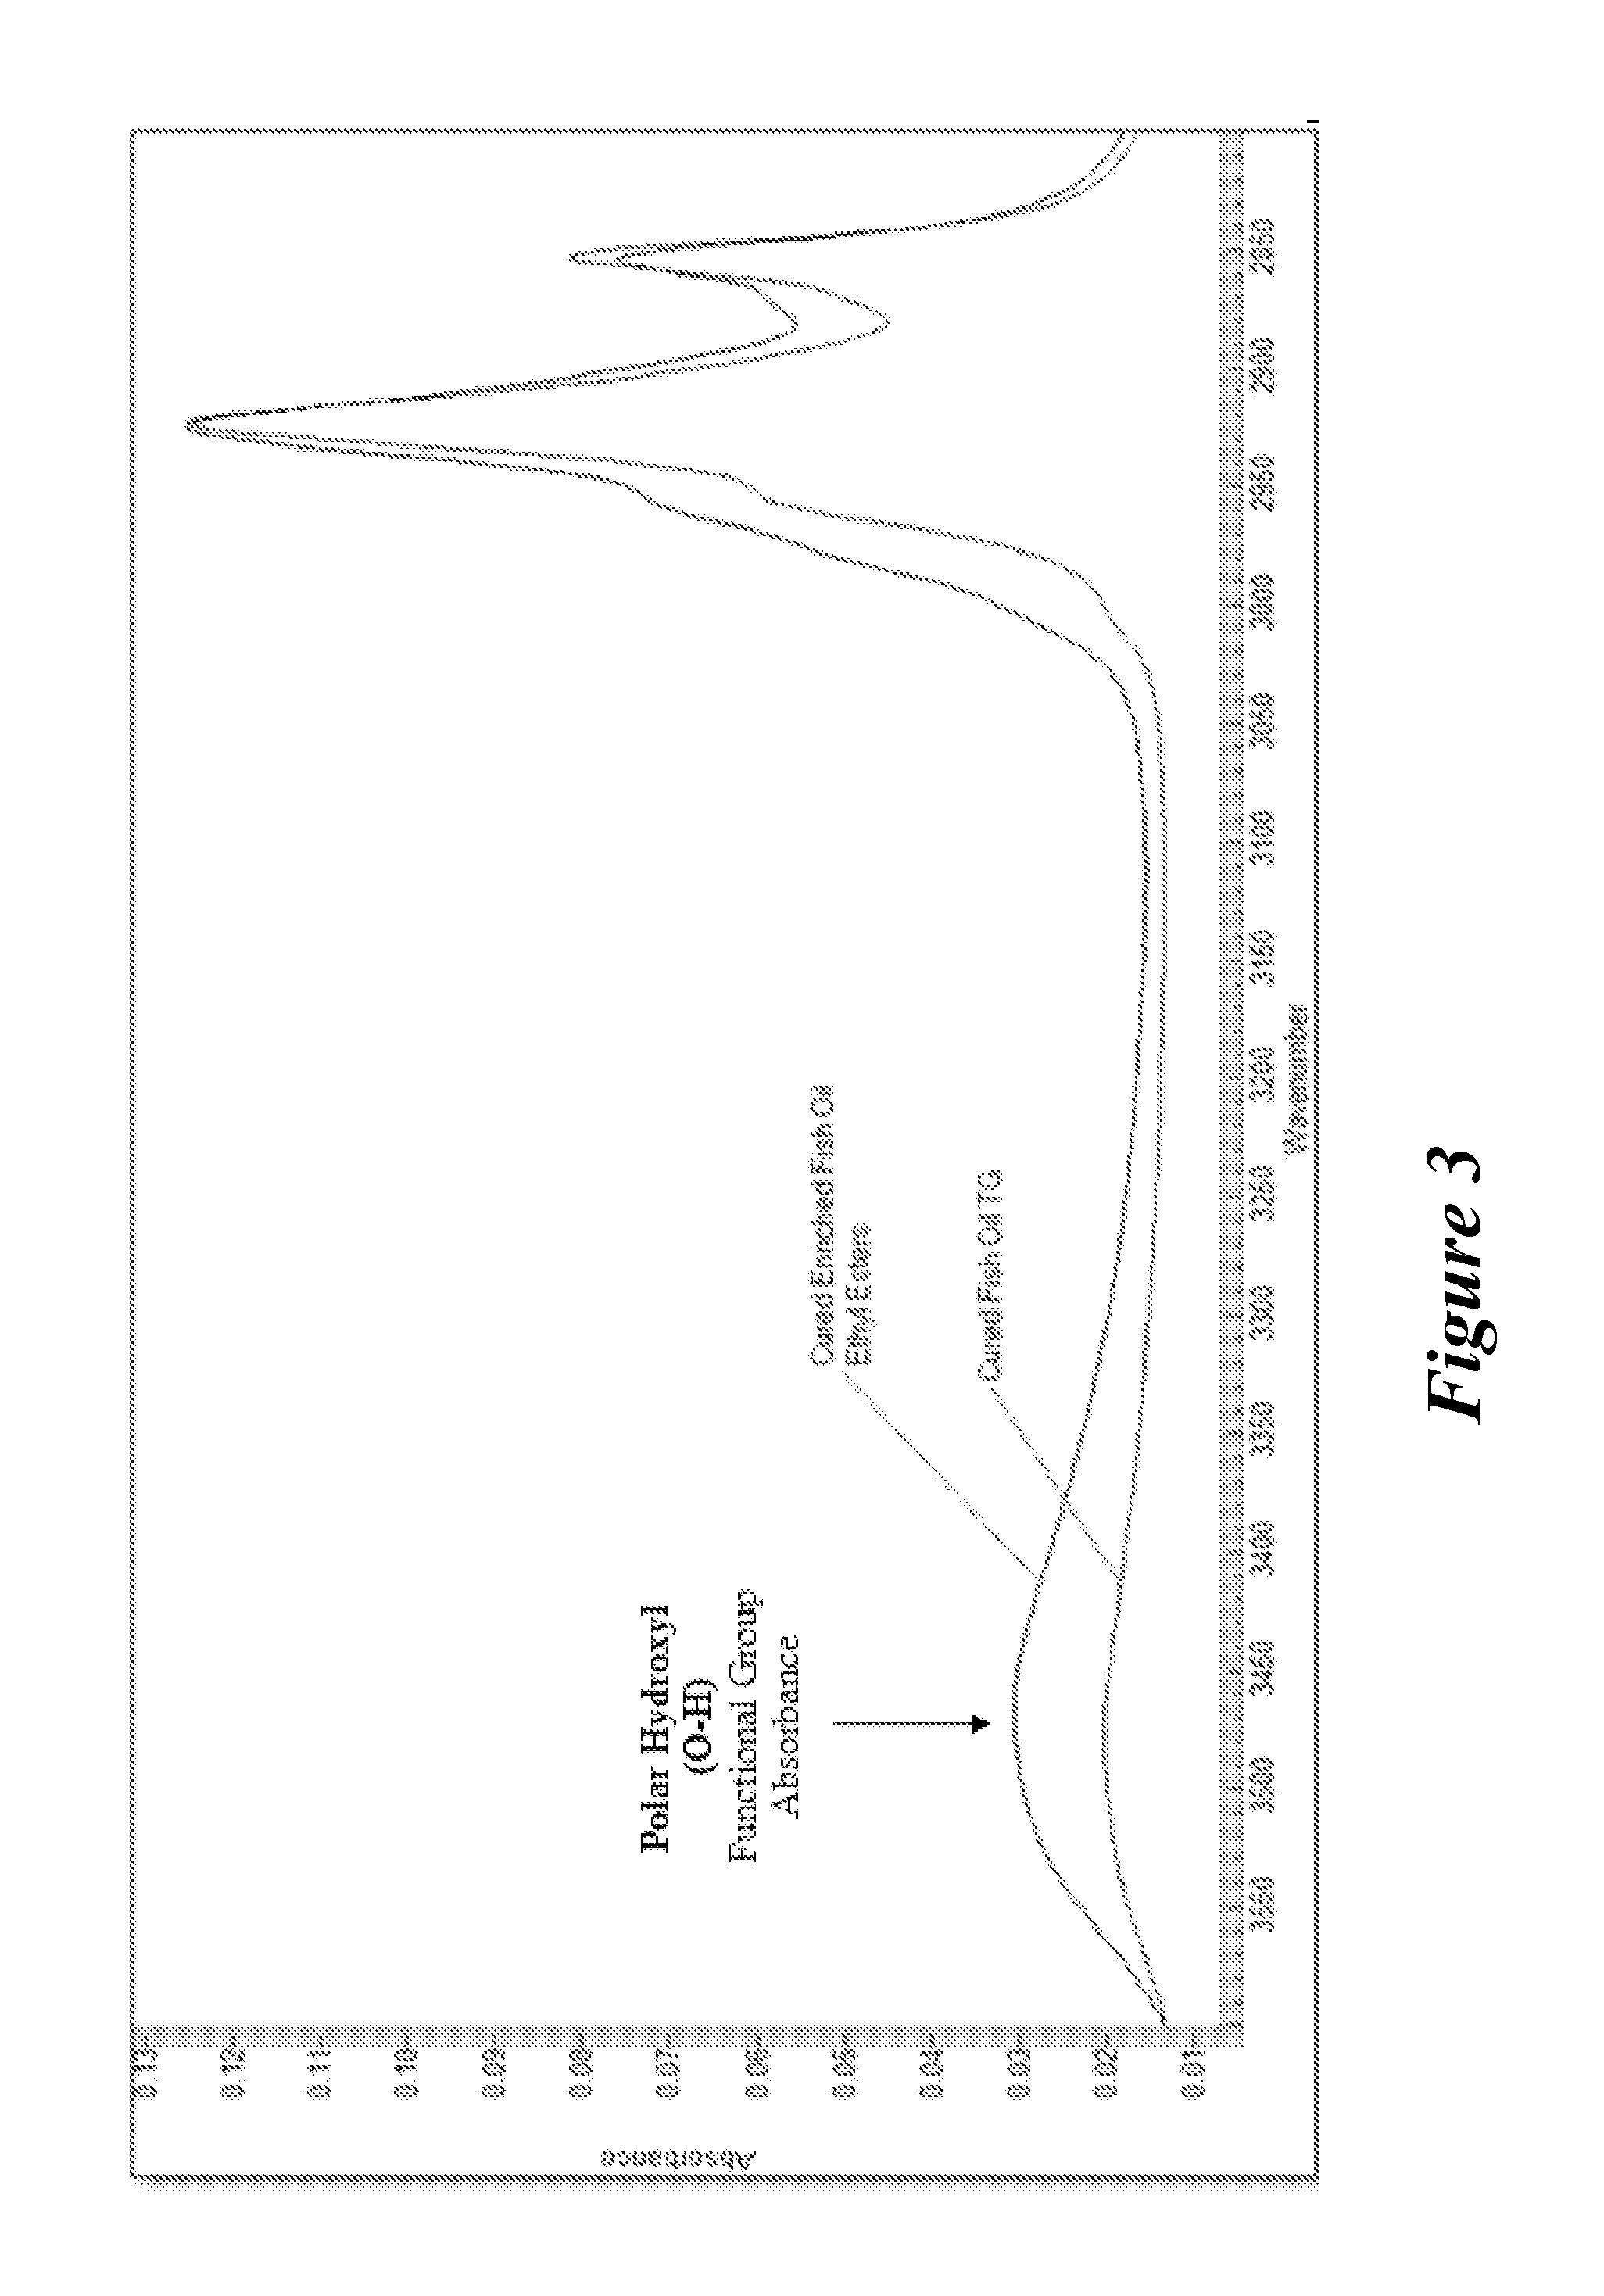 Compositions and methods for altering the rate of hydrolysis of cured oil-based materials